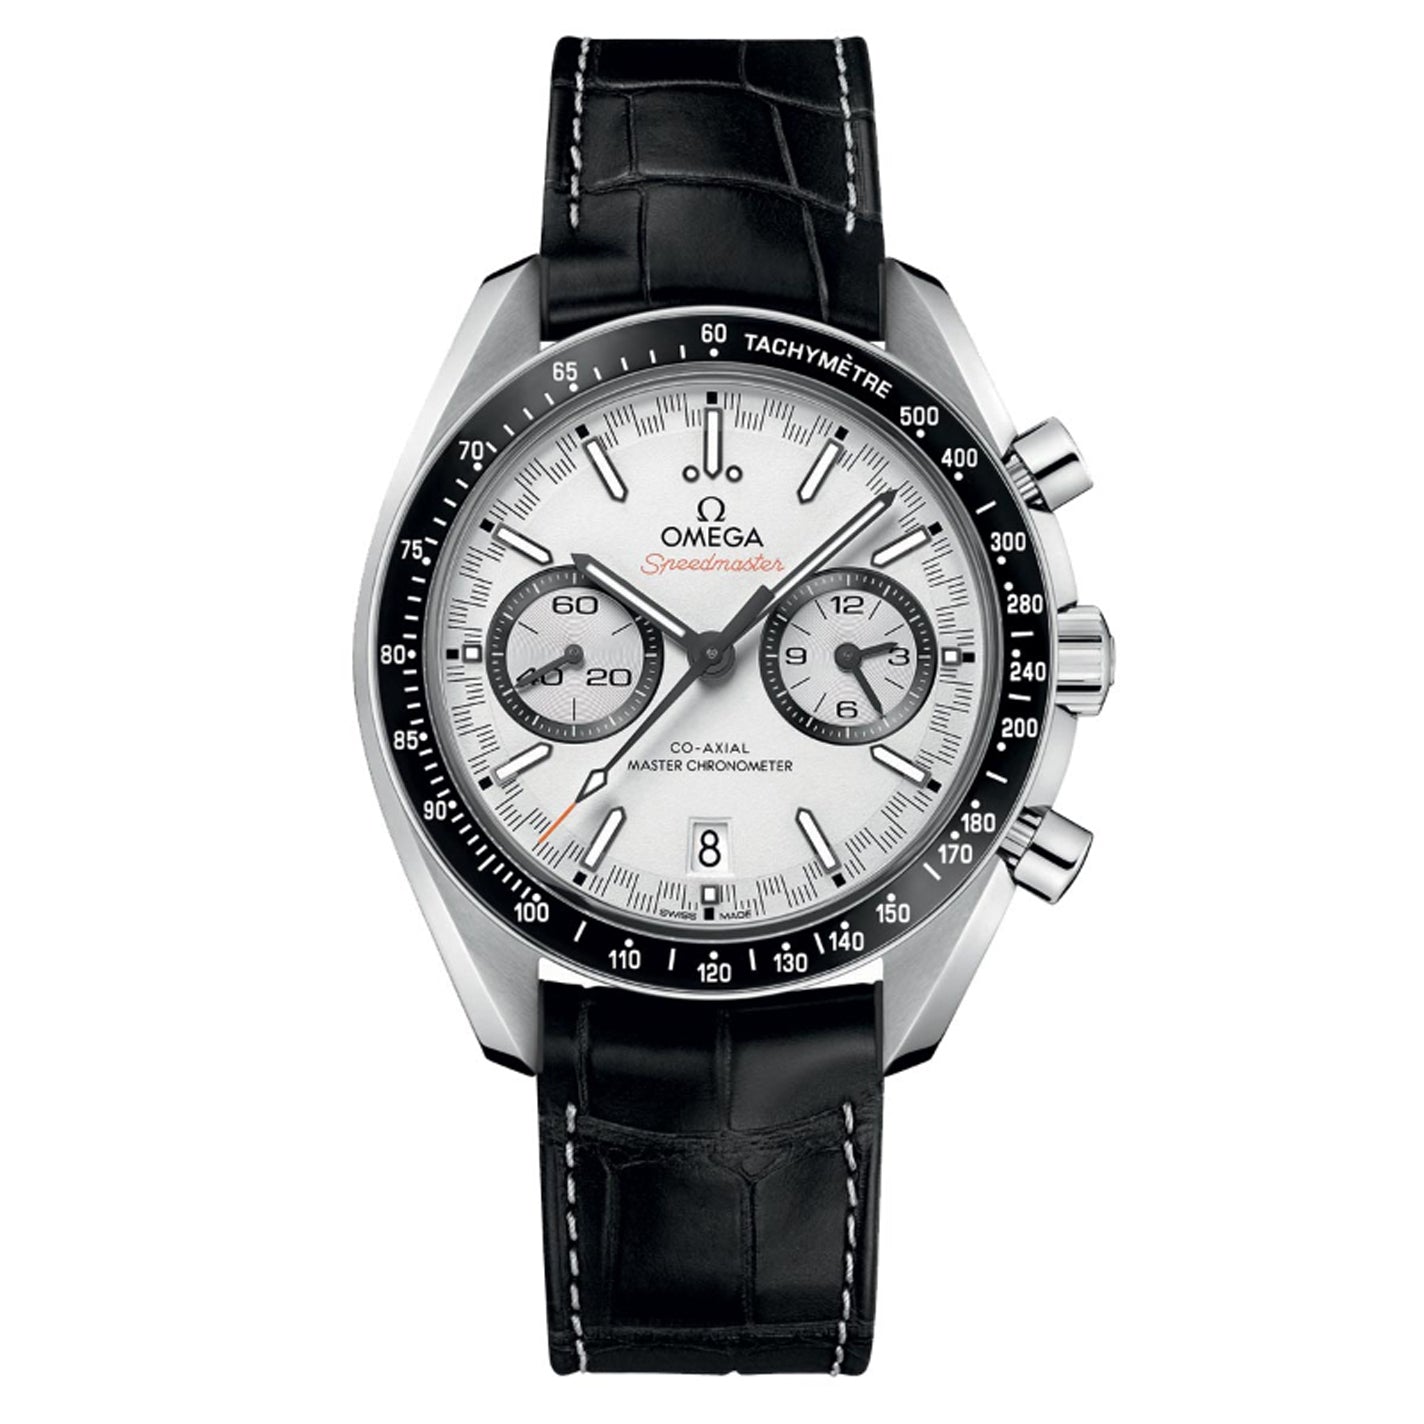 OMEGA Speedmaster Racing Co-Axial Master Chronometer Chronograph 44.25mm Watch